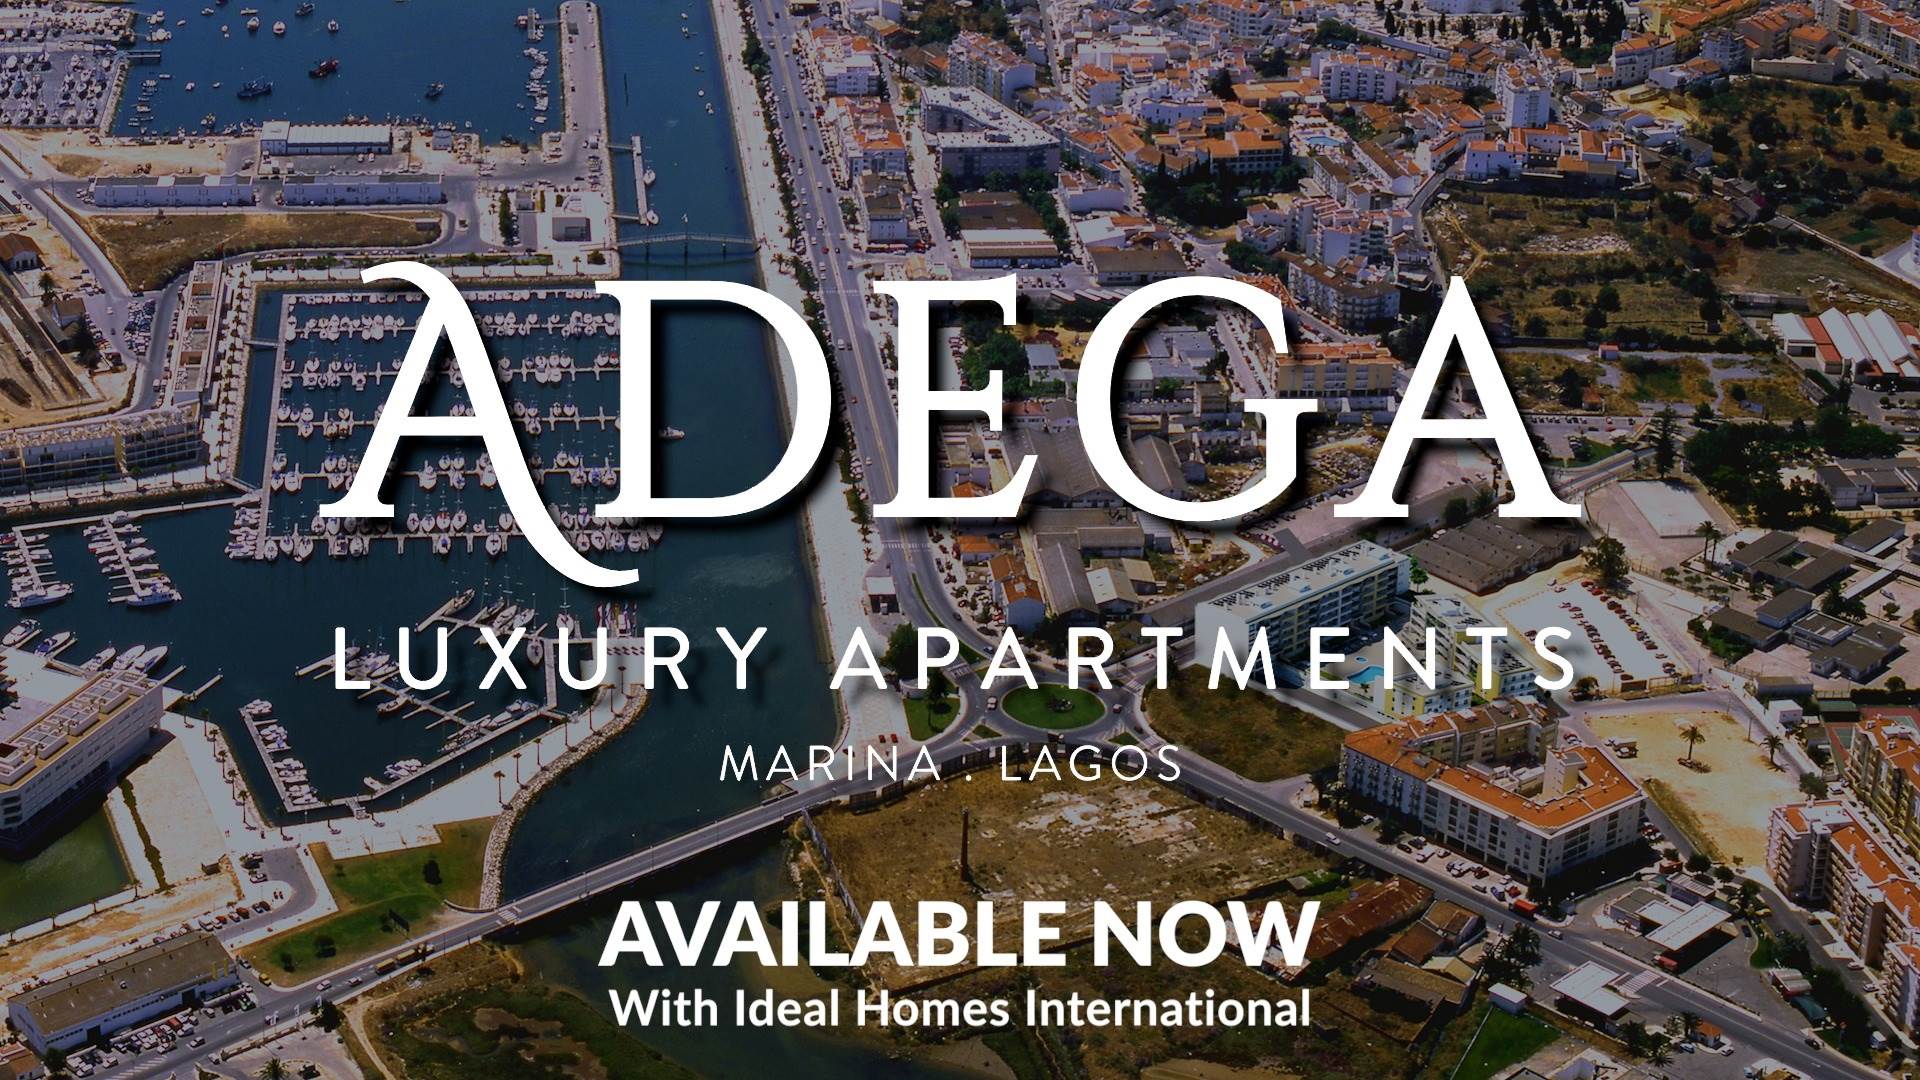 Ideal Homes Offers Investors Advice on How to Get Portugal’s Golden Visa By Earning Big on Property Investments